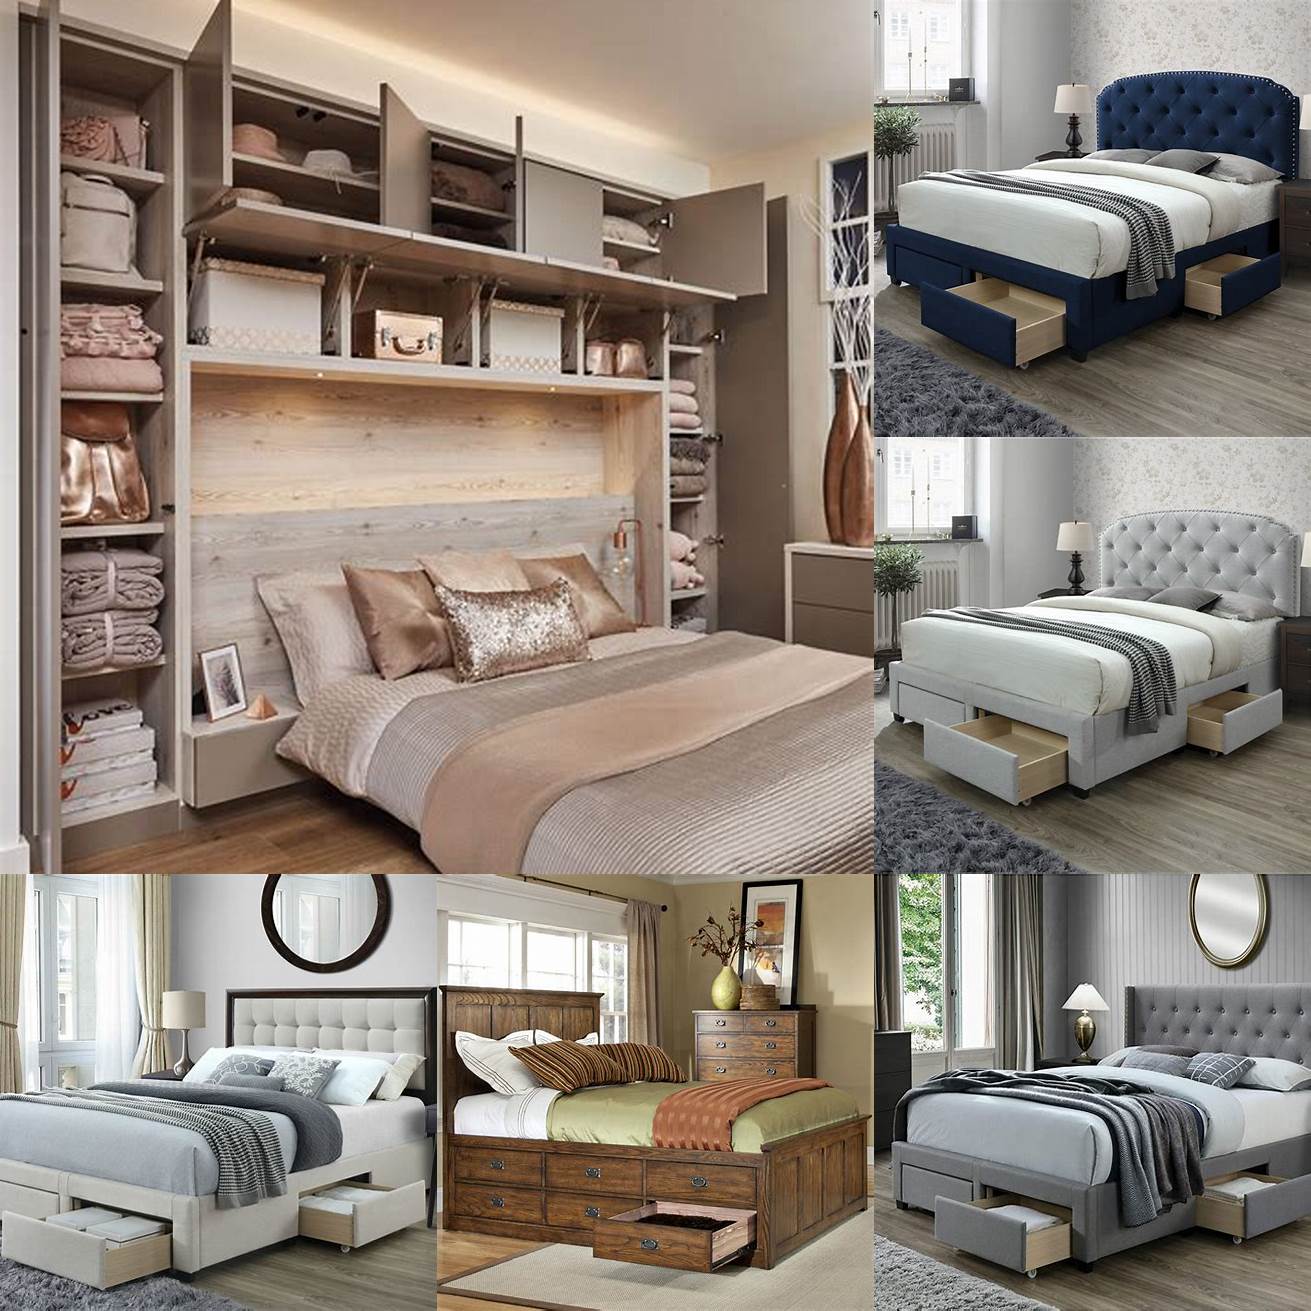 Consider the functionality If you have limited space in your bedroom choose a tufted bed that has storage drawers or shelves under the bed